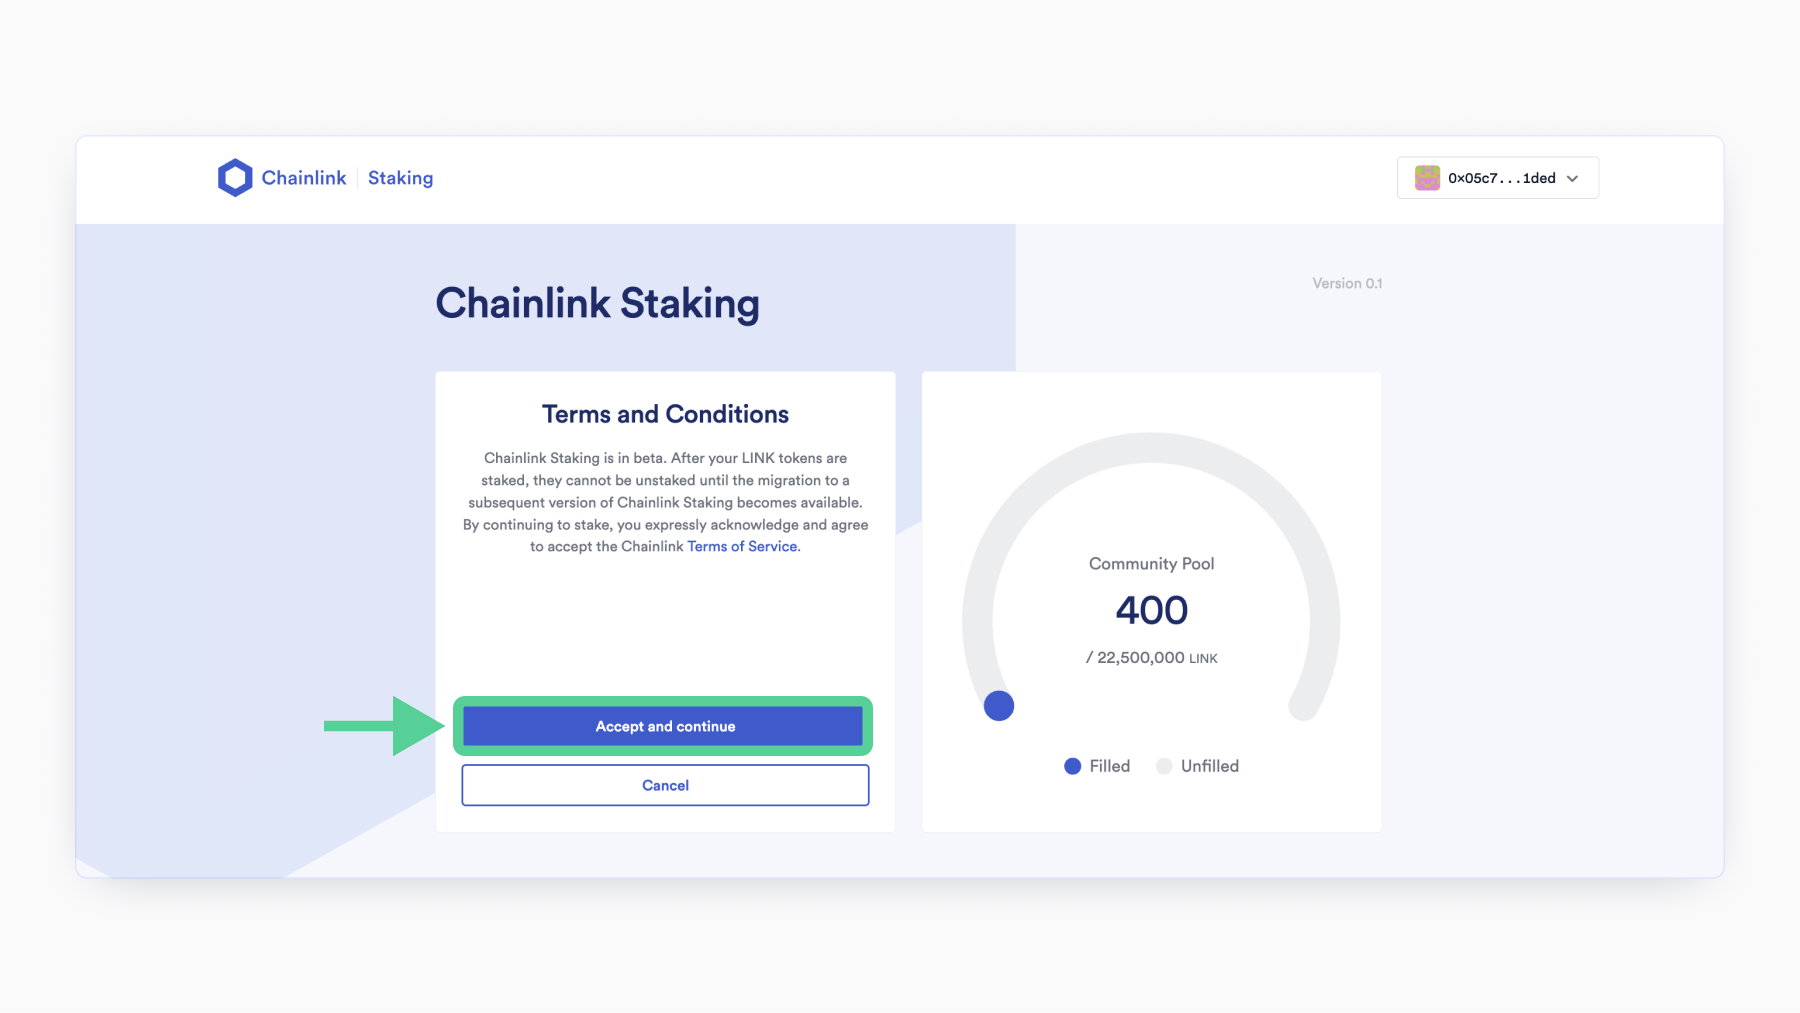 Screenshot showing where to press "Accept and continue" button in the Chainlink Staking process.